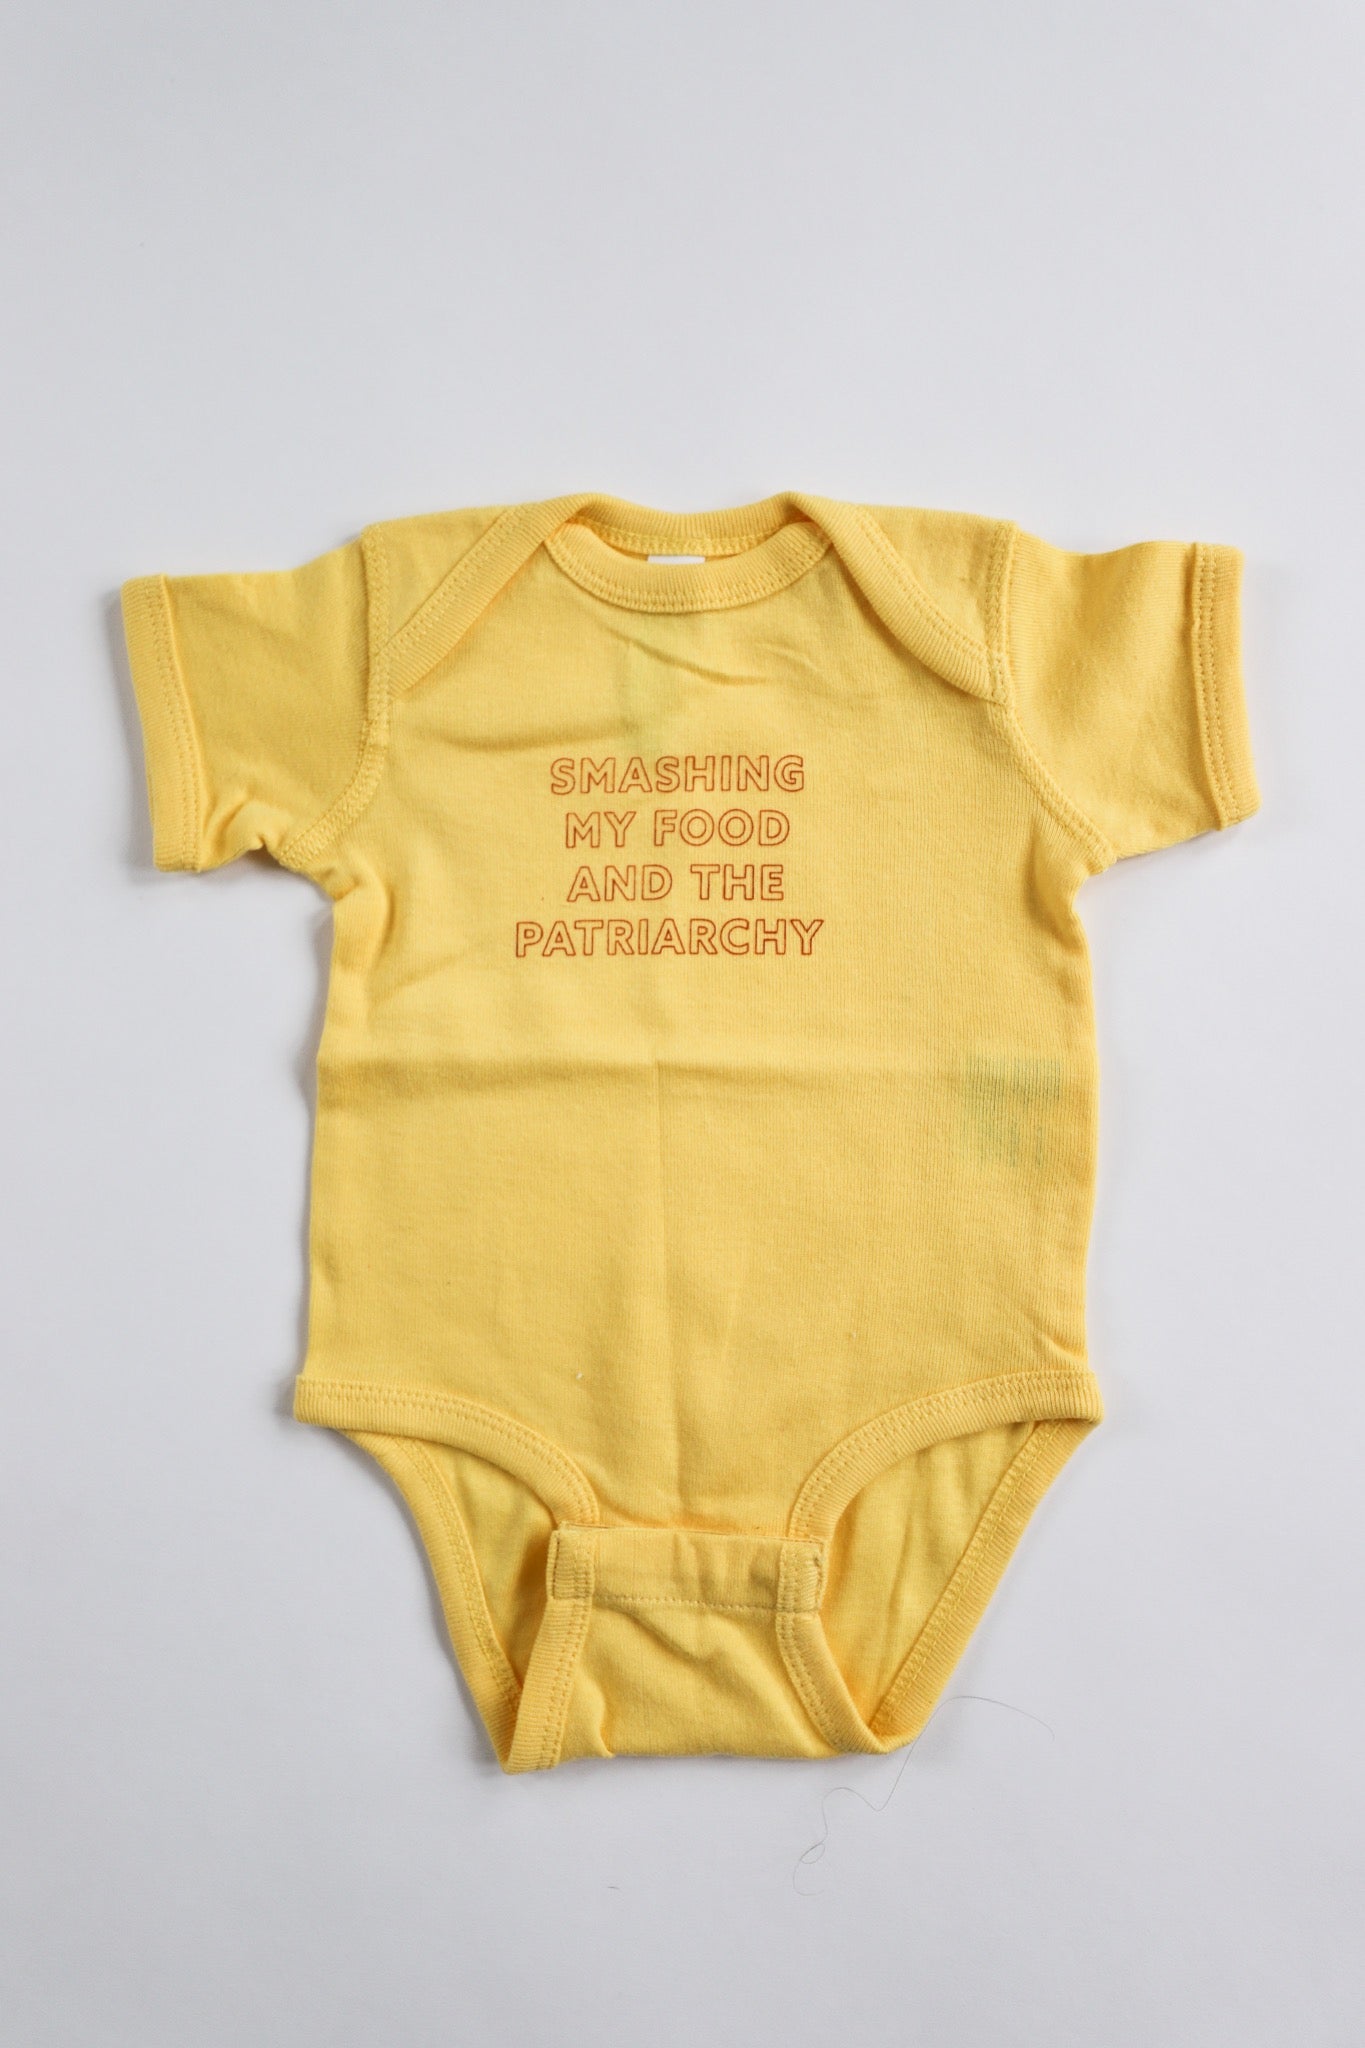 A yellow baby onesie reads "Smashing my Food and the Patriarchy" in red block letters